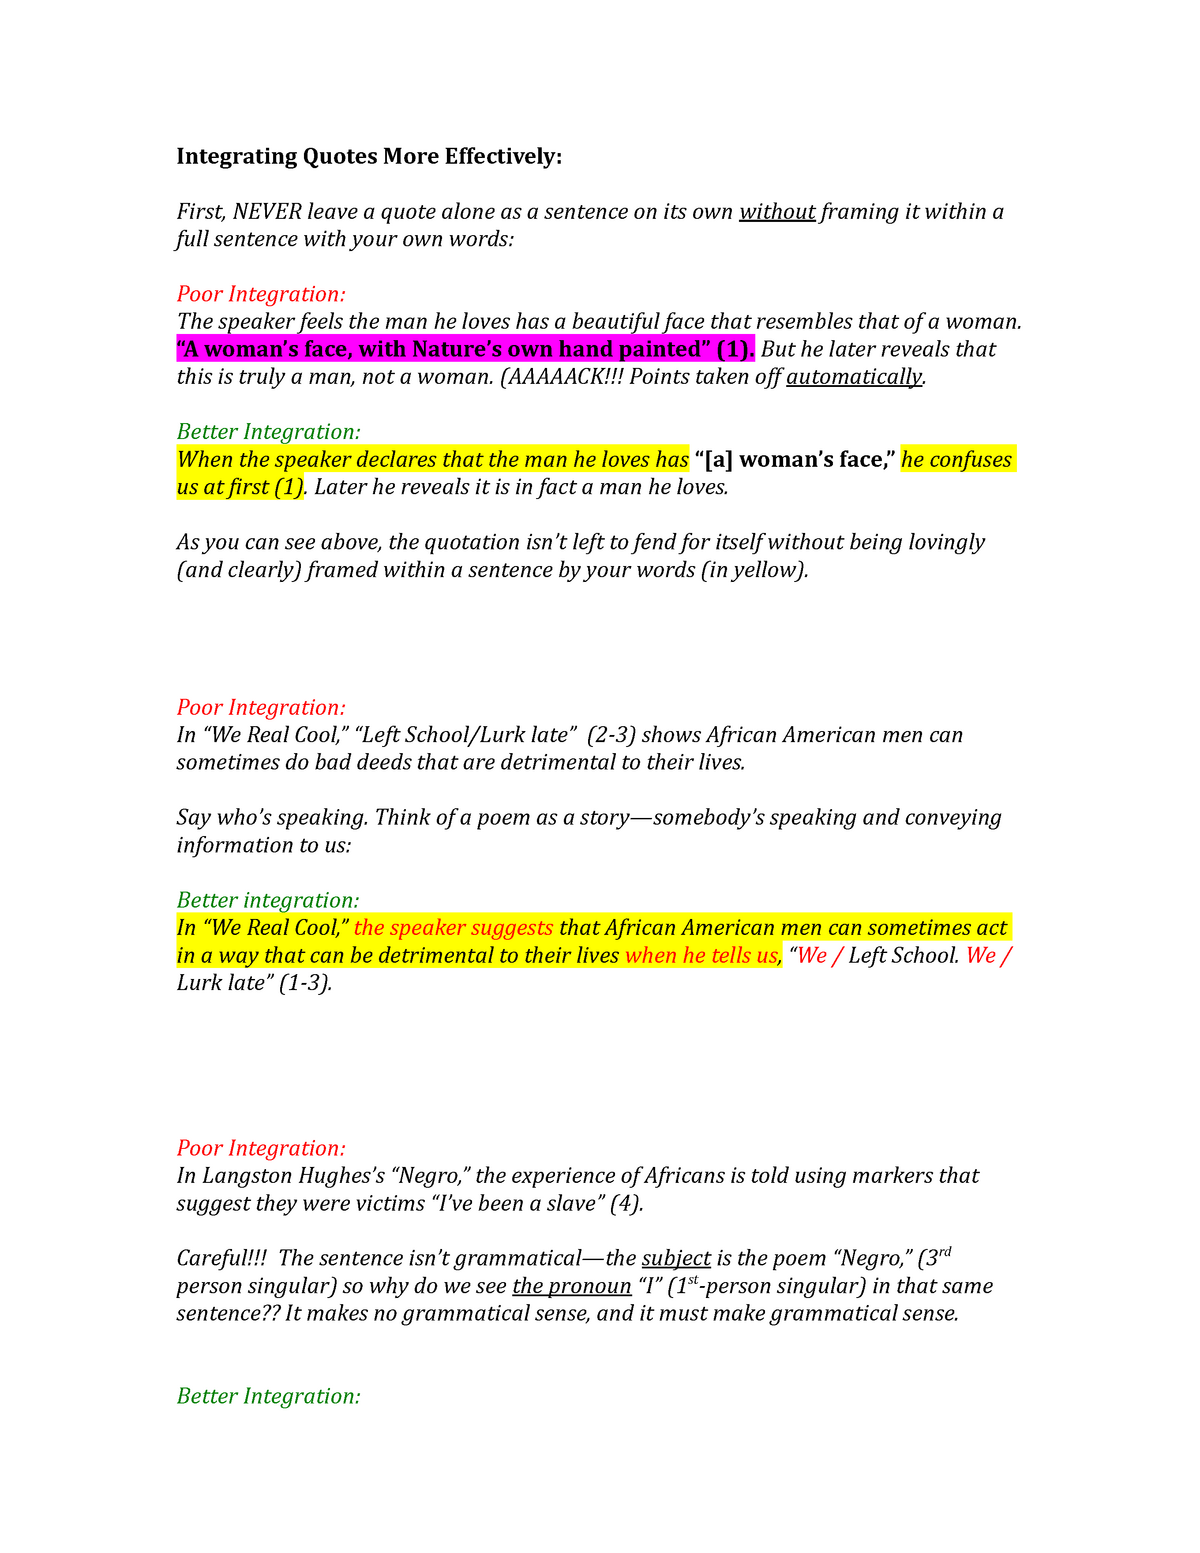 quote-integration-worksheet-using-quotes-and-paraphrase-in-literary-analysis-romeo-juliet-by